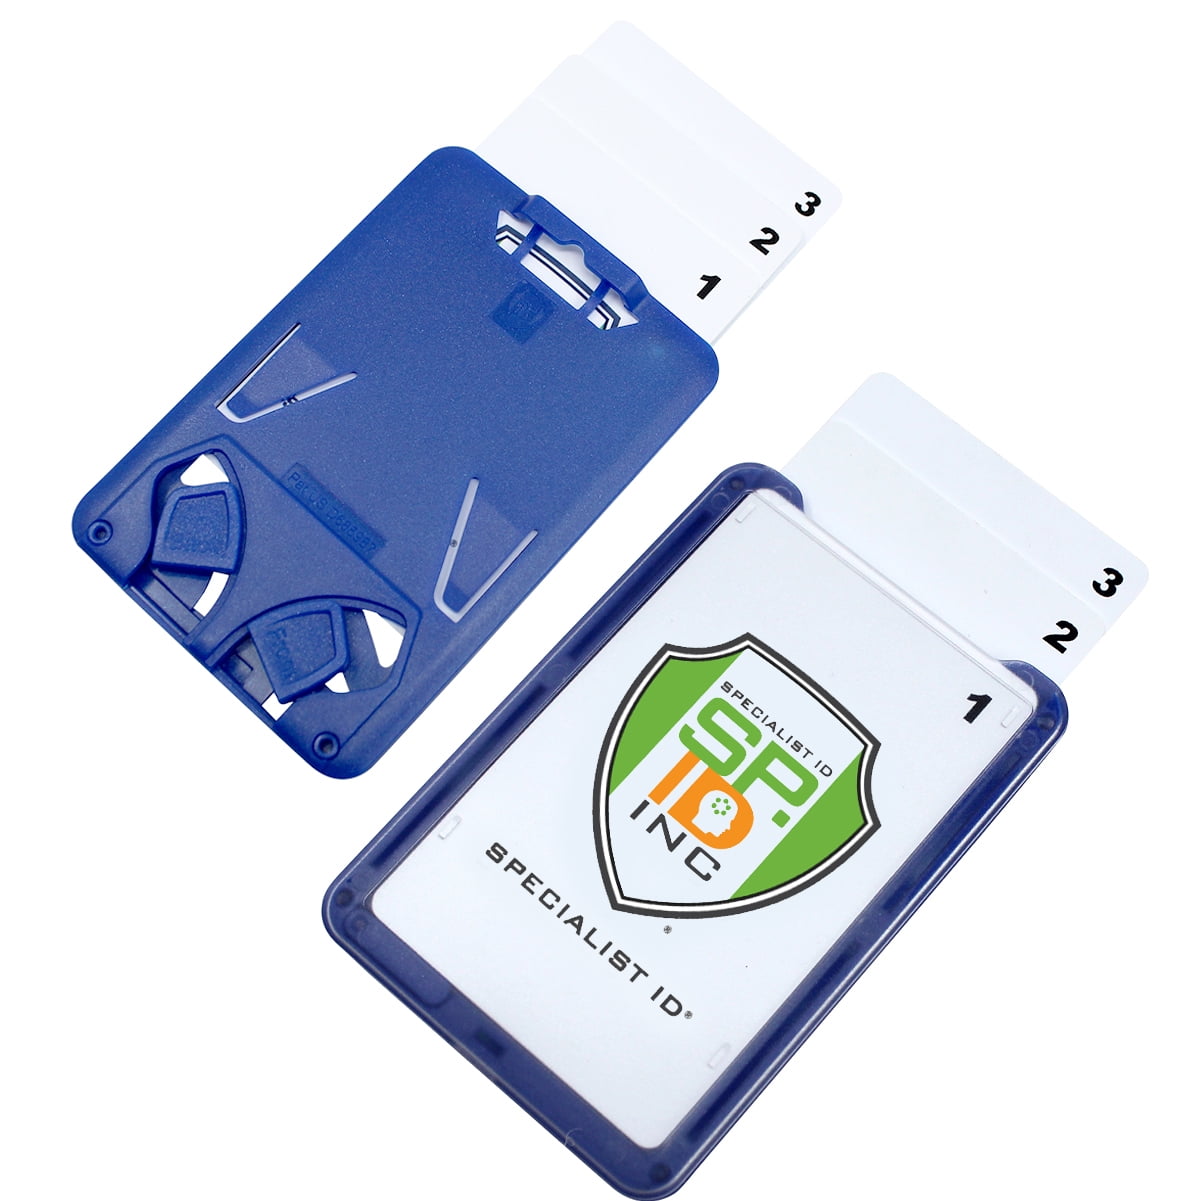 2 Pack - 3 Card Badge Holder Up to Three ID Badges - Heavy Duty Vertical  Rigid Hard Plastic Case for Multiple Cards - Polycarbonate - Tactical CAC,  Smart & Swipe I'd Holders by Specialist ID (Blue) 